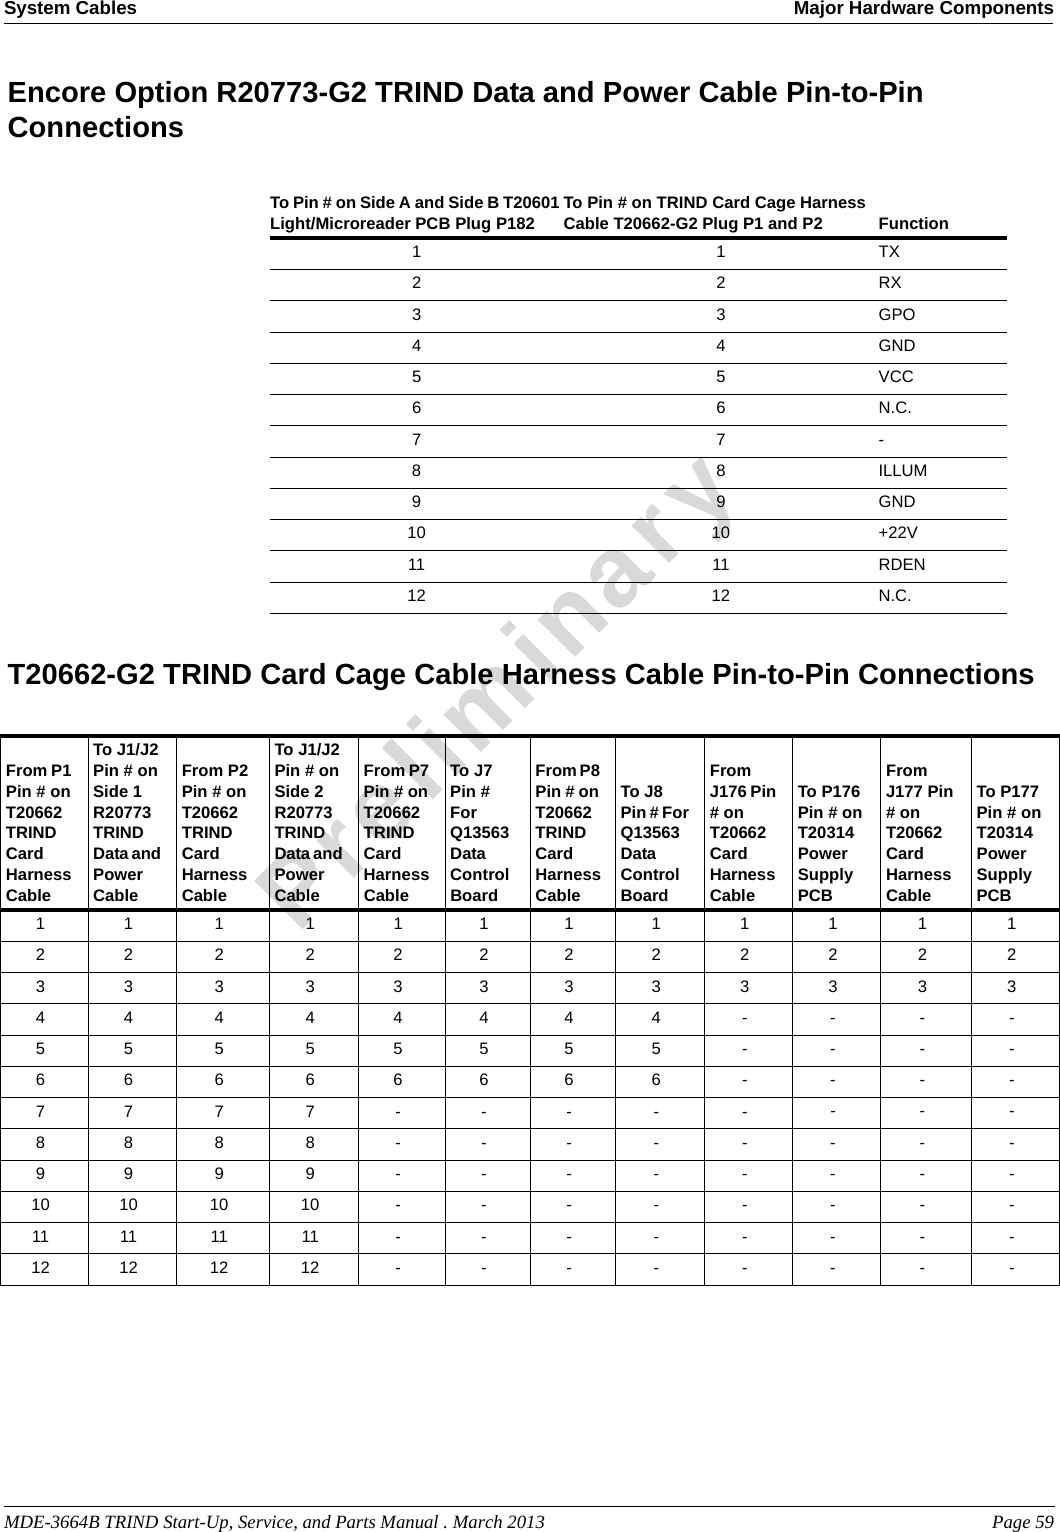 MDE-3664B TRIND Start-Up, Service, and Parts Manual . March 2013 Page 59System Cables Major Hardware ComponentsPreliminaryEncore Option R20773-G2 TRIND Data and Power Cable Pin-to-Pin ConnectionsTo Pin # on Side A and Side B T20601 Light/Microreader PCB Plug P182 To Pin # on TRIND Card Cage Harness Cable T20662-G2 Plug P1 and P2 Function1 1 TX2 2 RX3 3 GPO4 4 GND5 5 VCC6 6 N.C.7 7 -8 8 ILLUM9 9 GND10 10 +22V11 11 RDEN12 12 N.C.T20662-G2 TRIND Card Cage Cable Harness Cable Pin-to-Pin ConnectionsFrom P1 Pin # on T20662 TRIND Card Harness CableTo J1/J2 Pin # on Side 1 R20773 TRIND Data and Power CableFrom P2 Pin # on T20662 TRIND Card Harness CableTo J1/J2 Pin # on Side 2 R20773 TRIND Data and Power CableFrom P7 Pin # on T20662 TRIND Card Harness CableTo J7 Pin # For Q13563 Data Control Board From P8 Pin # on T20662 TRIND Card Harness CableTo J8 Pin # For Q13563 Data Control Board From J176 Pin # on T20662 Card Harness Cable To P176 Pin # on T20314 Power Supply PCBFrom J177 Pin # on T20662 Card Harness Cable To P177 Pin # on T20314 Power Supply PCB1 1 1 1 1 1 1 1 1 1 1 12 2 2 2 2 2 2 2 2 2 2 23 3 3 3 3 3 3 3 3 3 3 34 4 4 4 4 4 4 4 - - - -5 5 5 5 5 5 5 5 - - - -6 6 6 6 6 6 6 6 - - - -7 7 7 7 - - - - - - - -8 8 8 8 - - - - - - - -9 9 9 9 - - - - - - - -10 10 10 10 - - - - - - - -11 11 11 11 - - - - - - - -12 12 12 12 - - - - - - - -